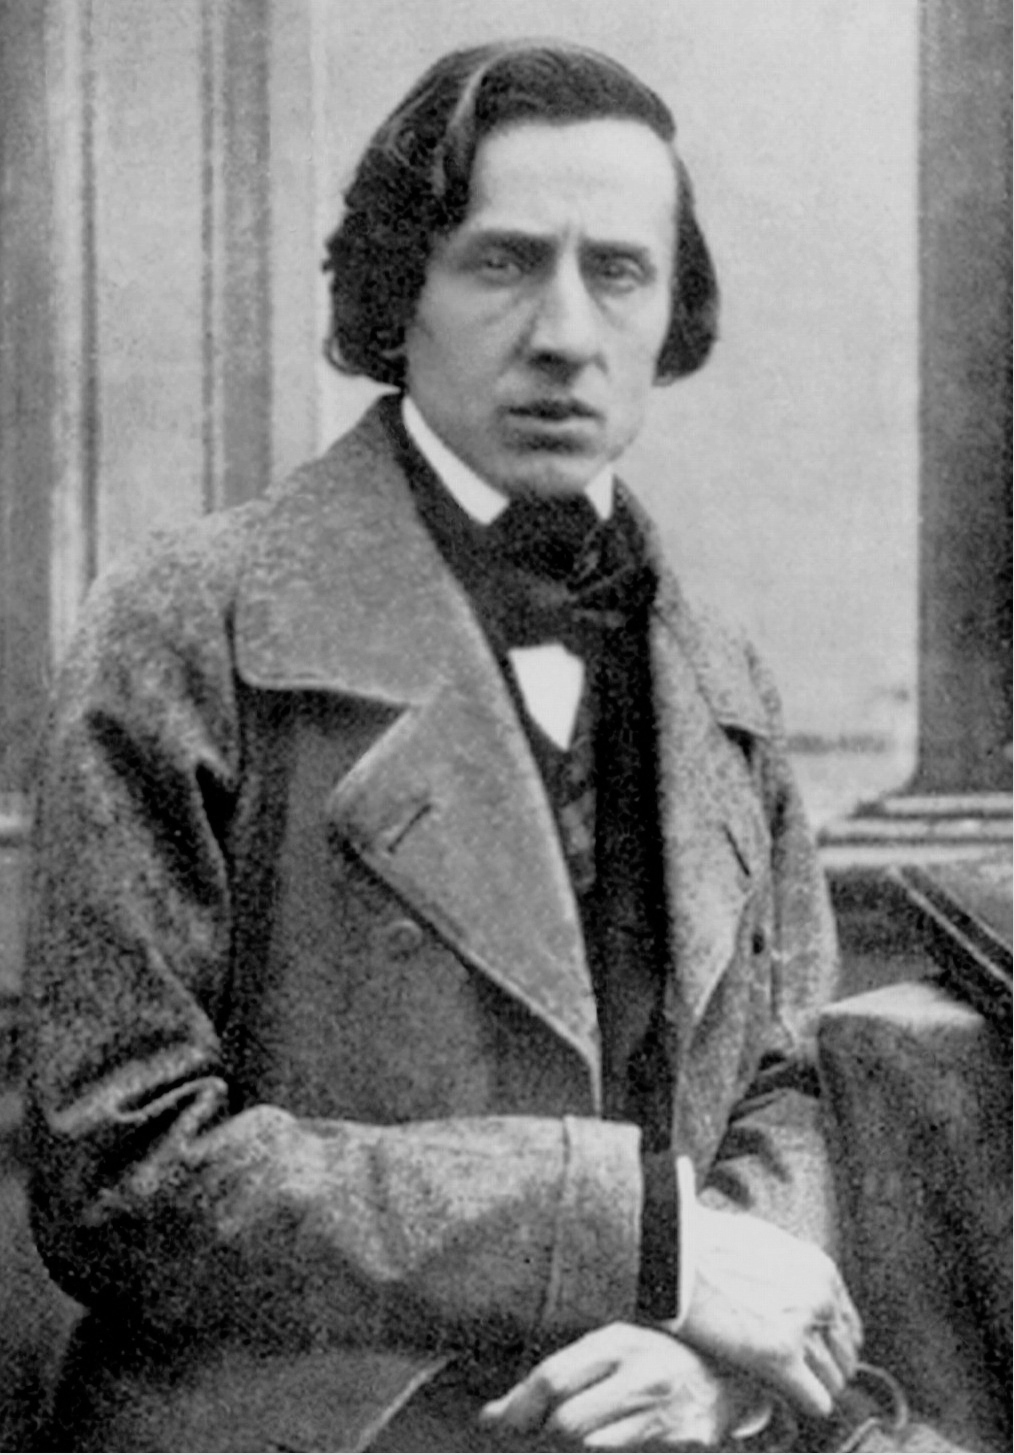 Photo of Frédéric Chopin, 1849. (credit: Wiki Commons)